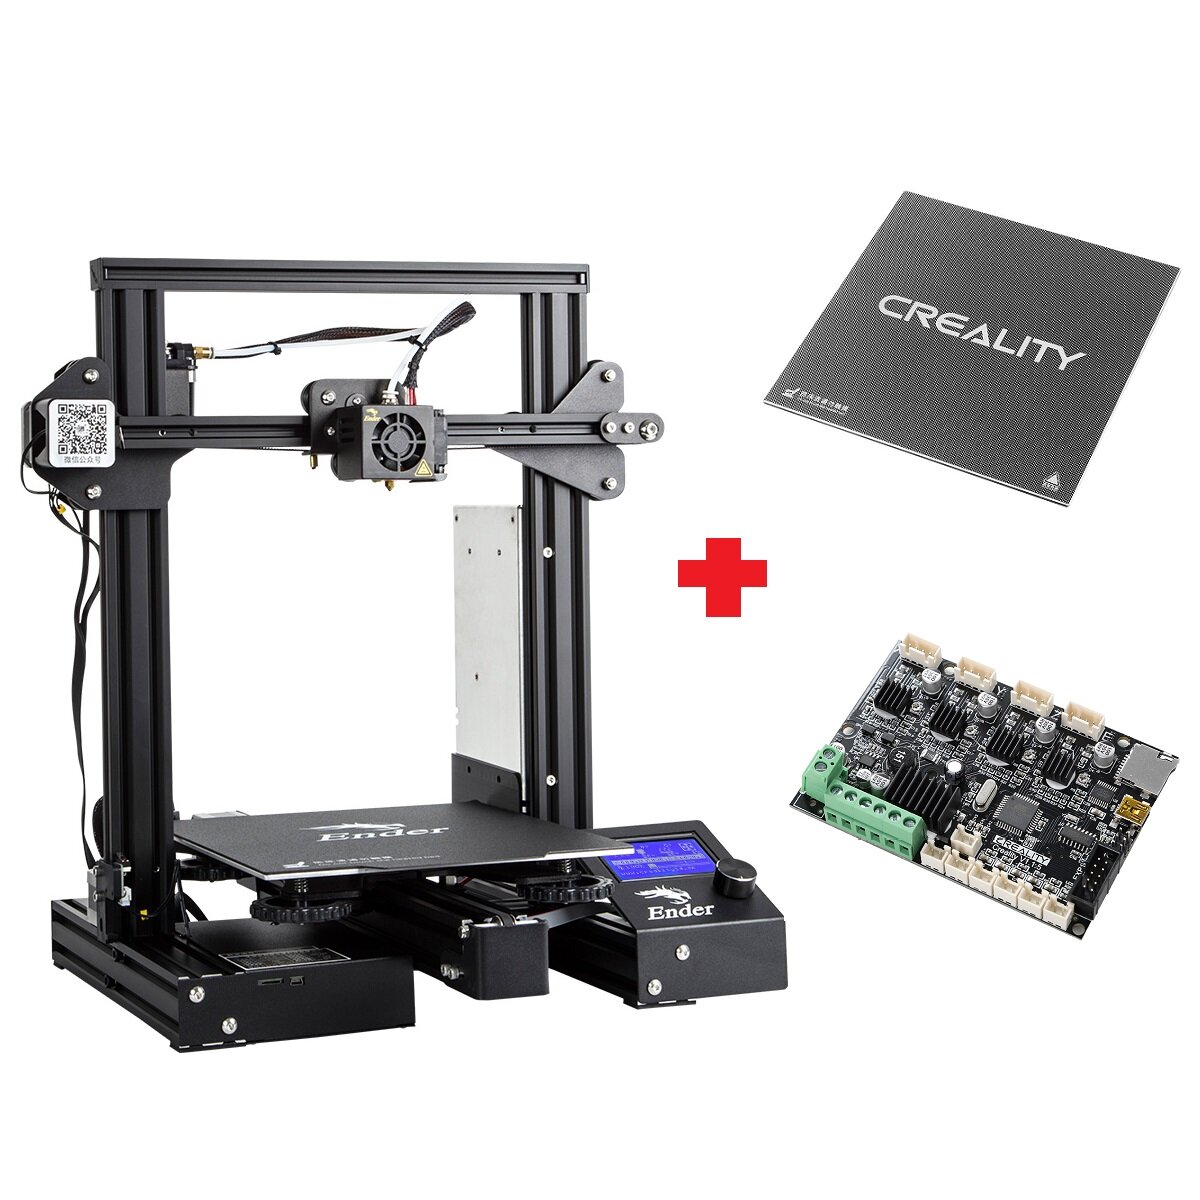 Creality 3D® Customized Version Ender-3Xs Pro Prusa I3 3D Printer 220x220x250mm Printing Size With Magnetic Removable Sticker/Glass Plate Platform/V1.1.5 Super Silent Mainboard